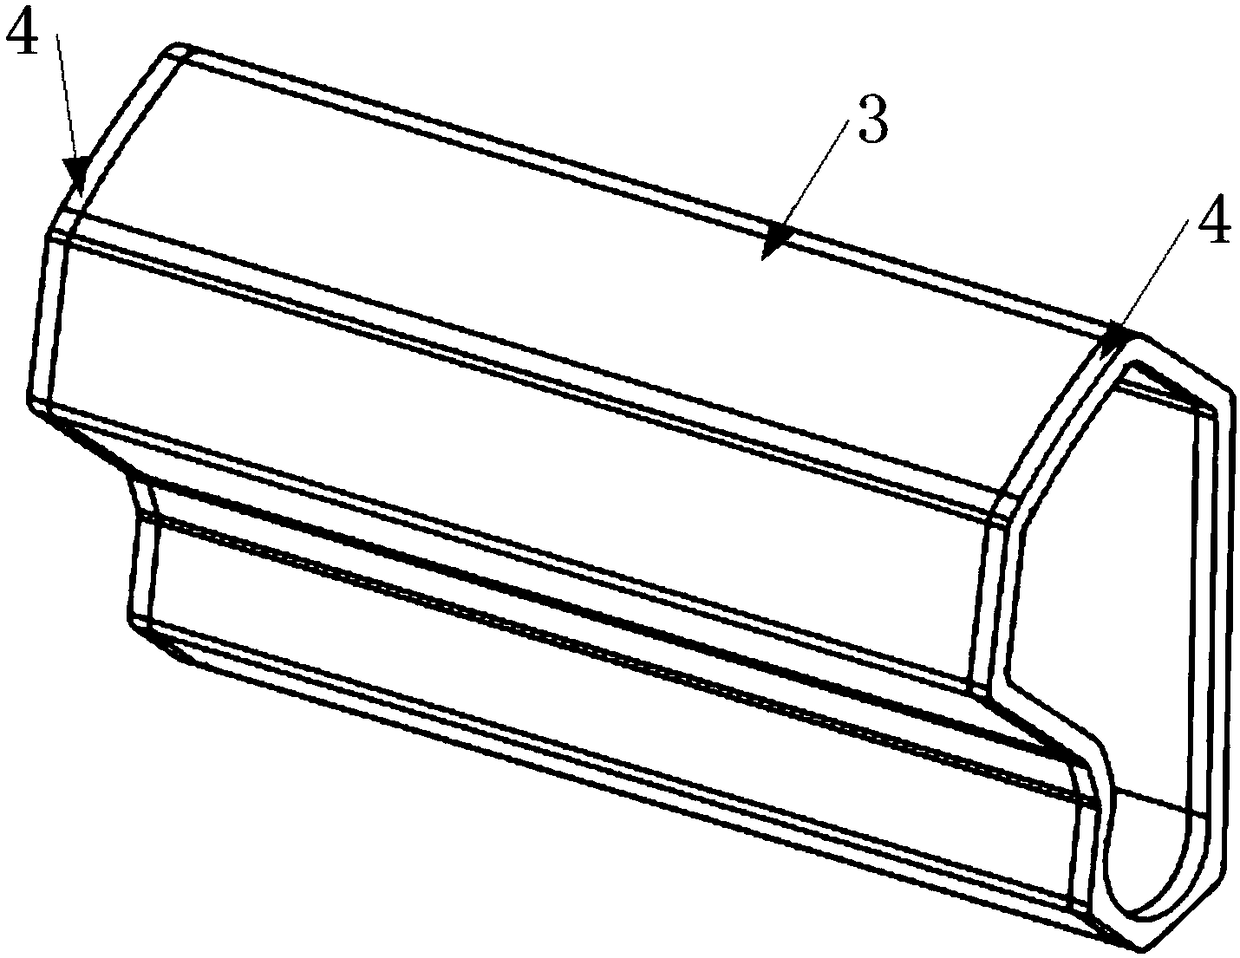 Portable computer hinge shell manufacturing method